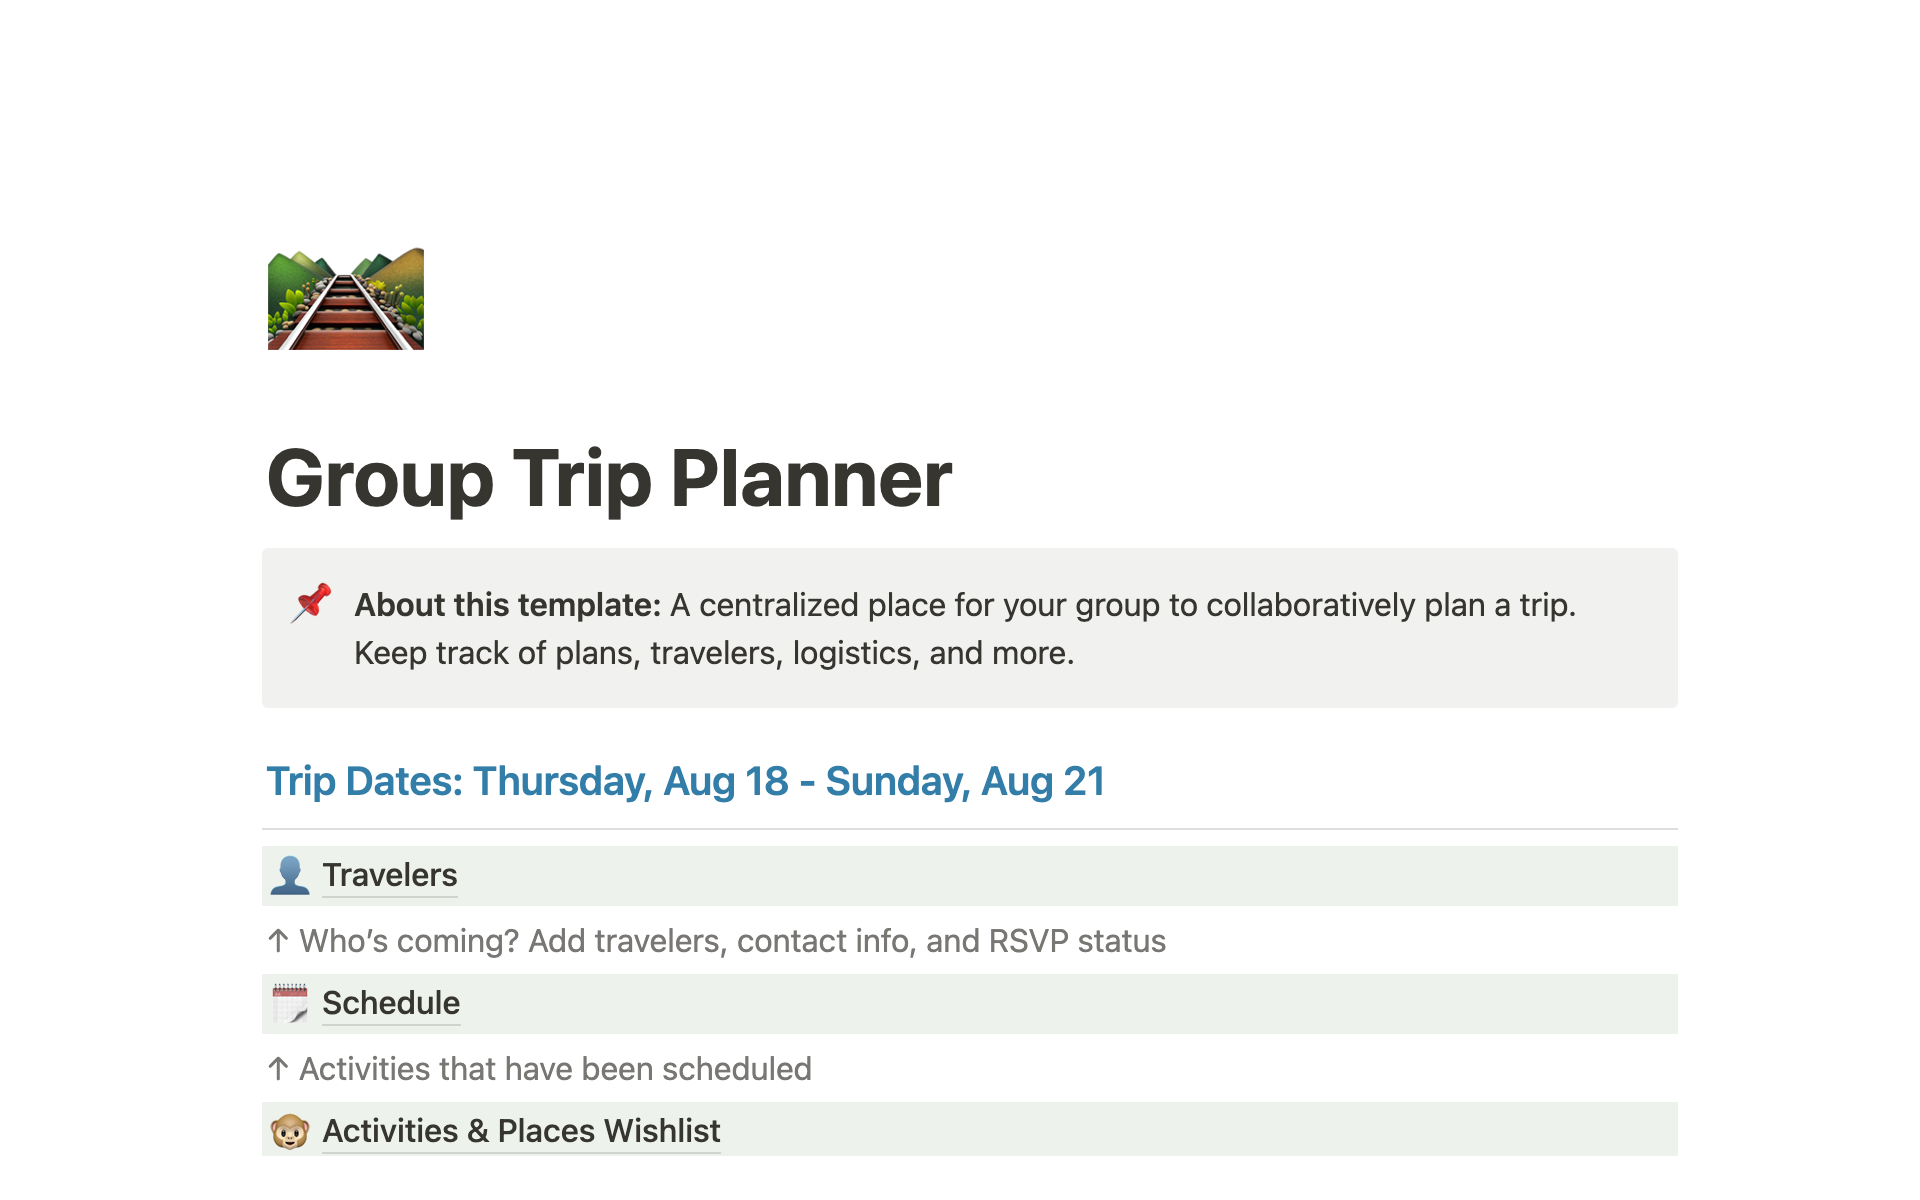 Collaboratively plan a trip with others.